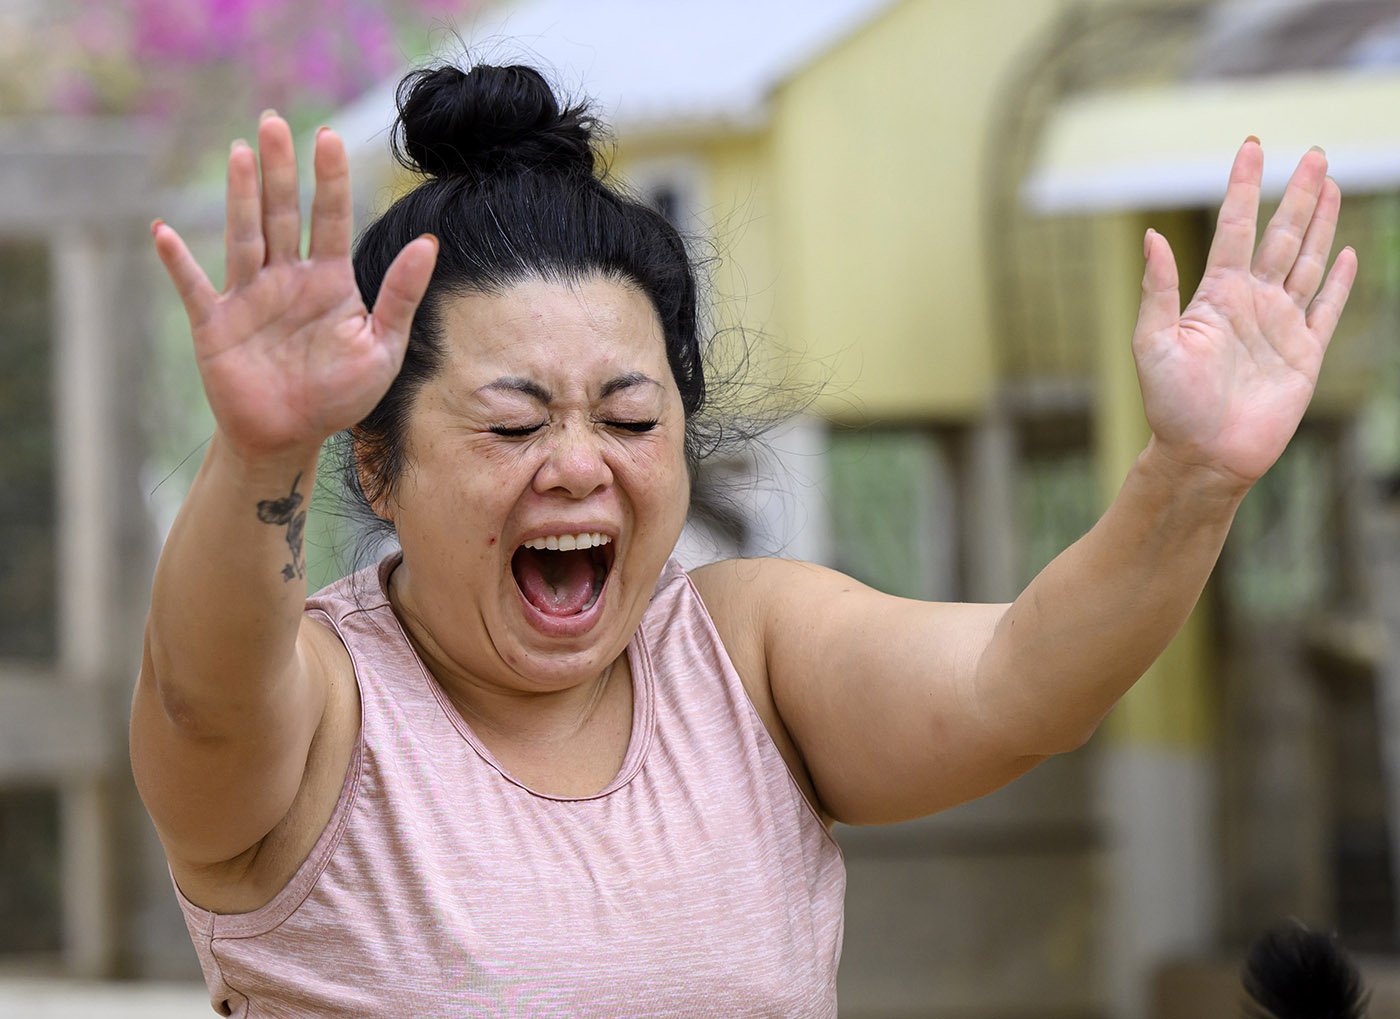  Jennie Rios of Irvine reacts after baby goat Violet had a potty accident on her back and it seeped “to my buttocks,” during Yin Yoga at Goods and Goats in San Juan Capistrano on Sunday, August 28, 2022.  